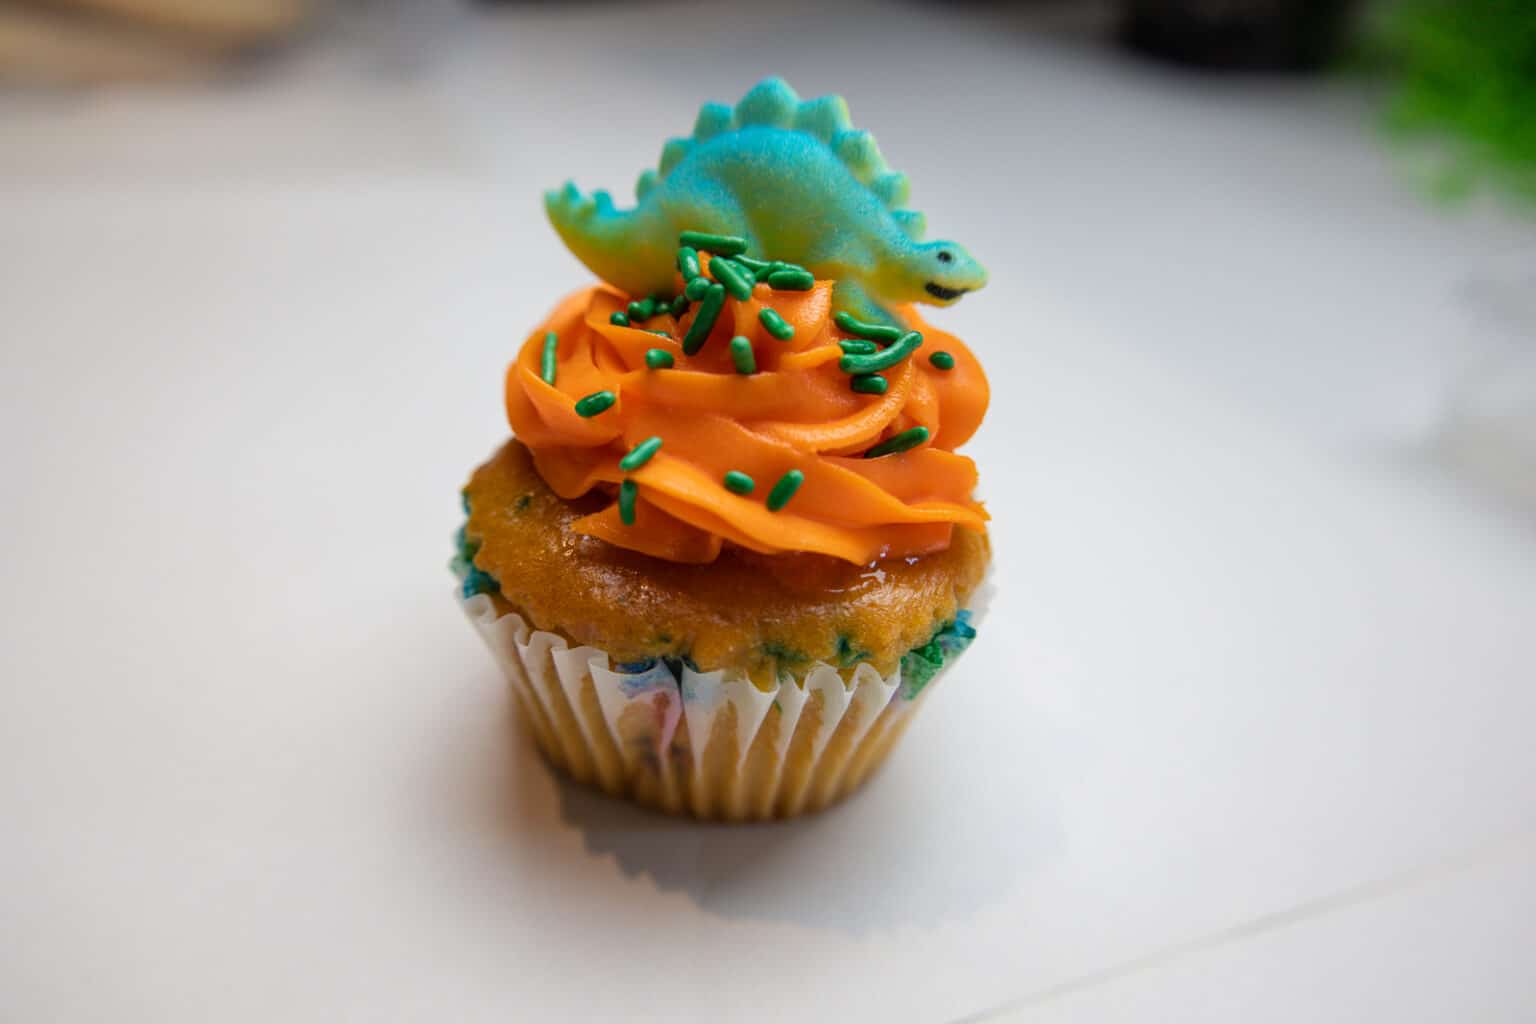 Cupcake with a dinosaur on top